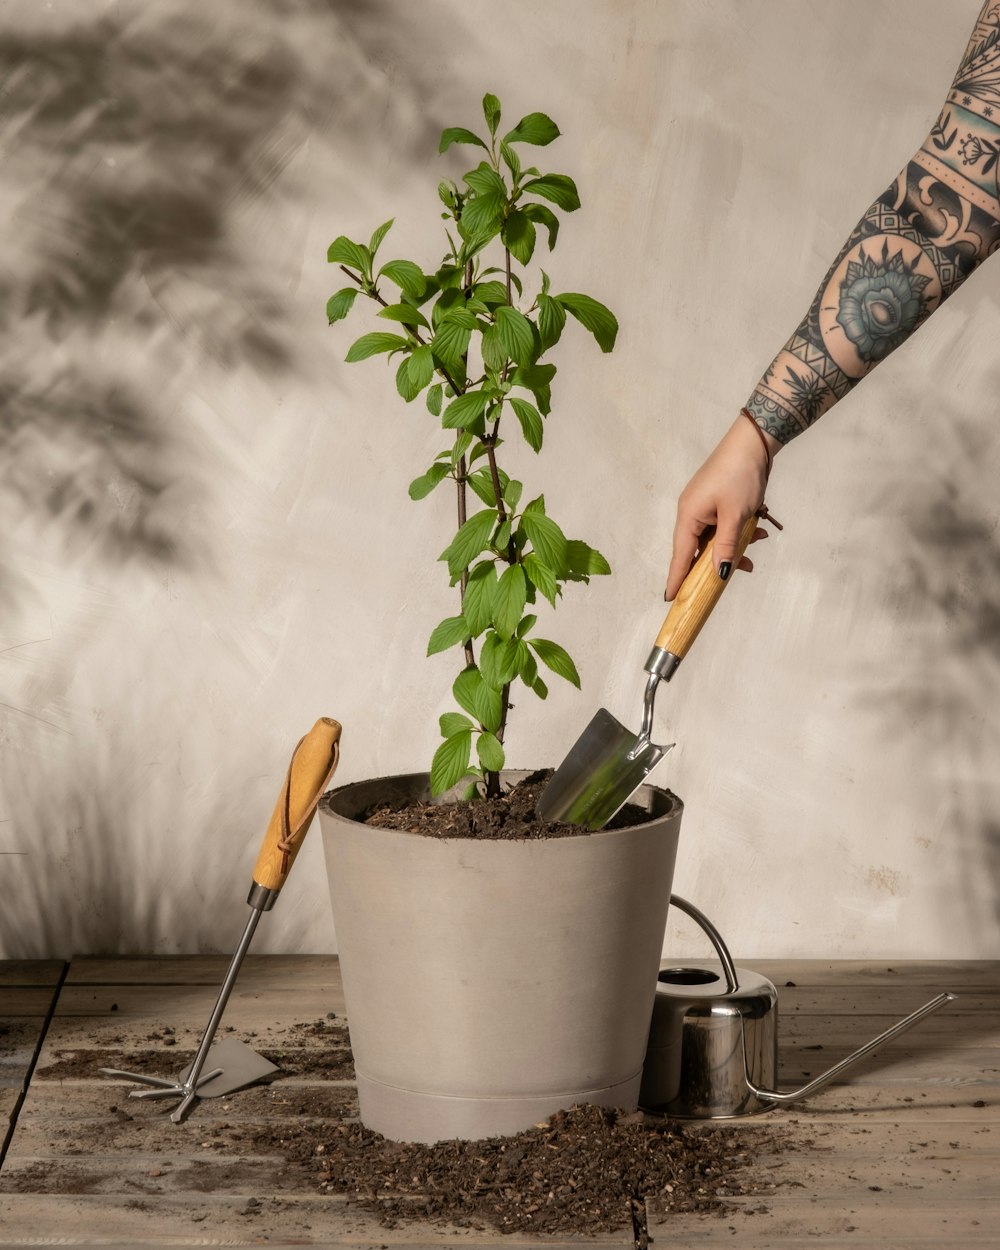 a man with a tattoo on his arm is digging into a potted plant